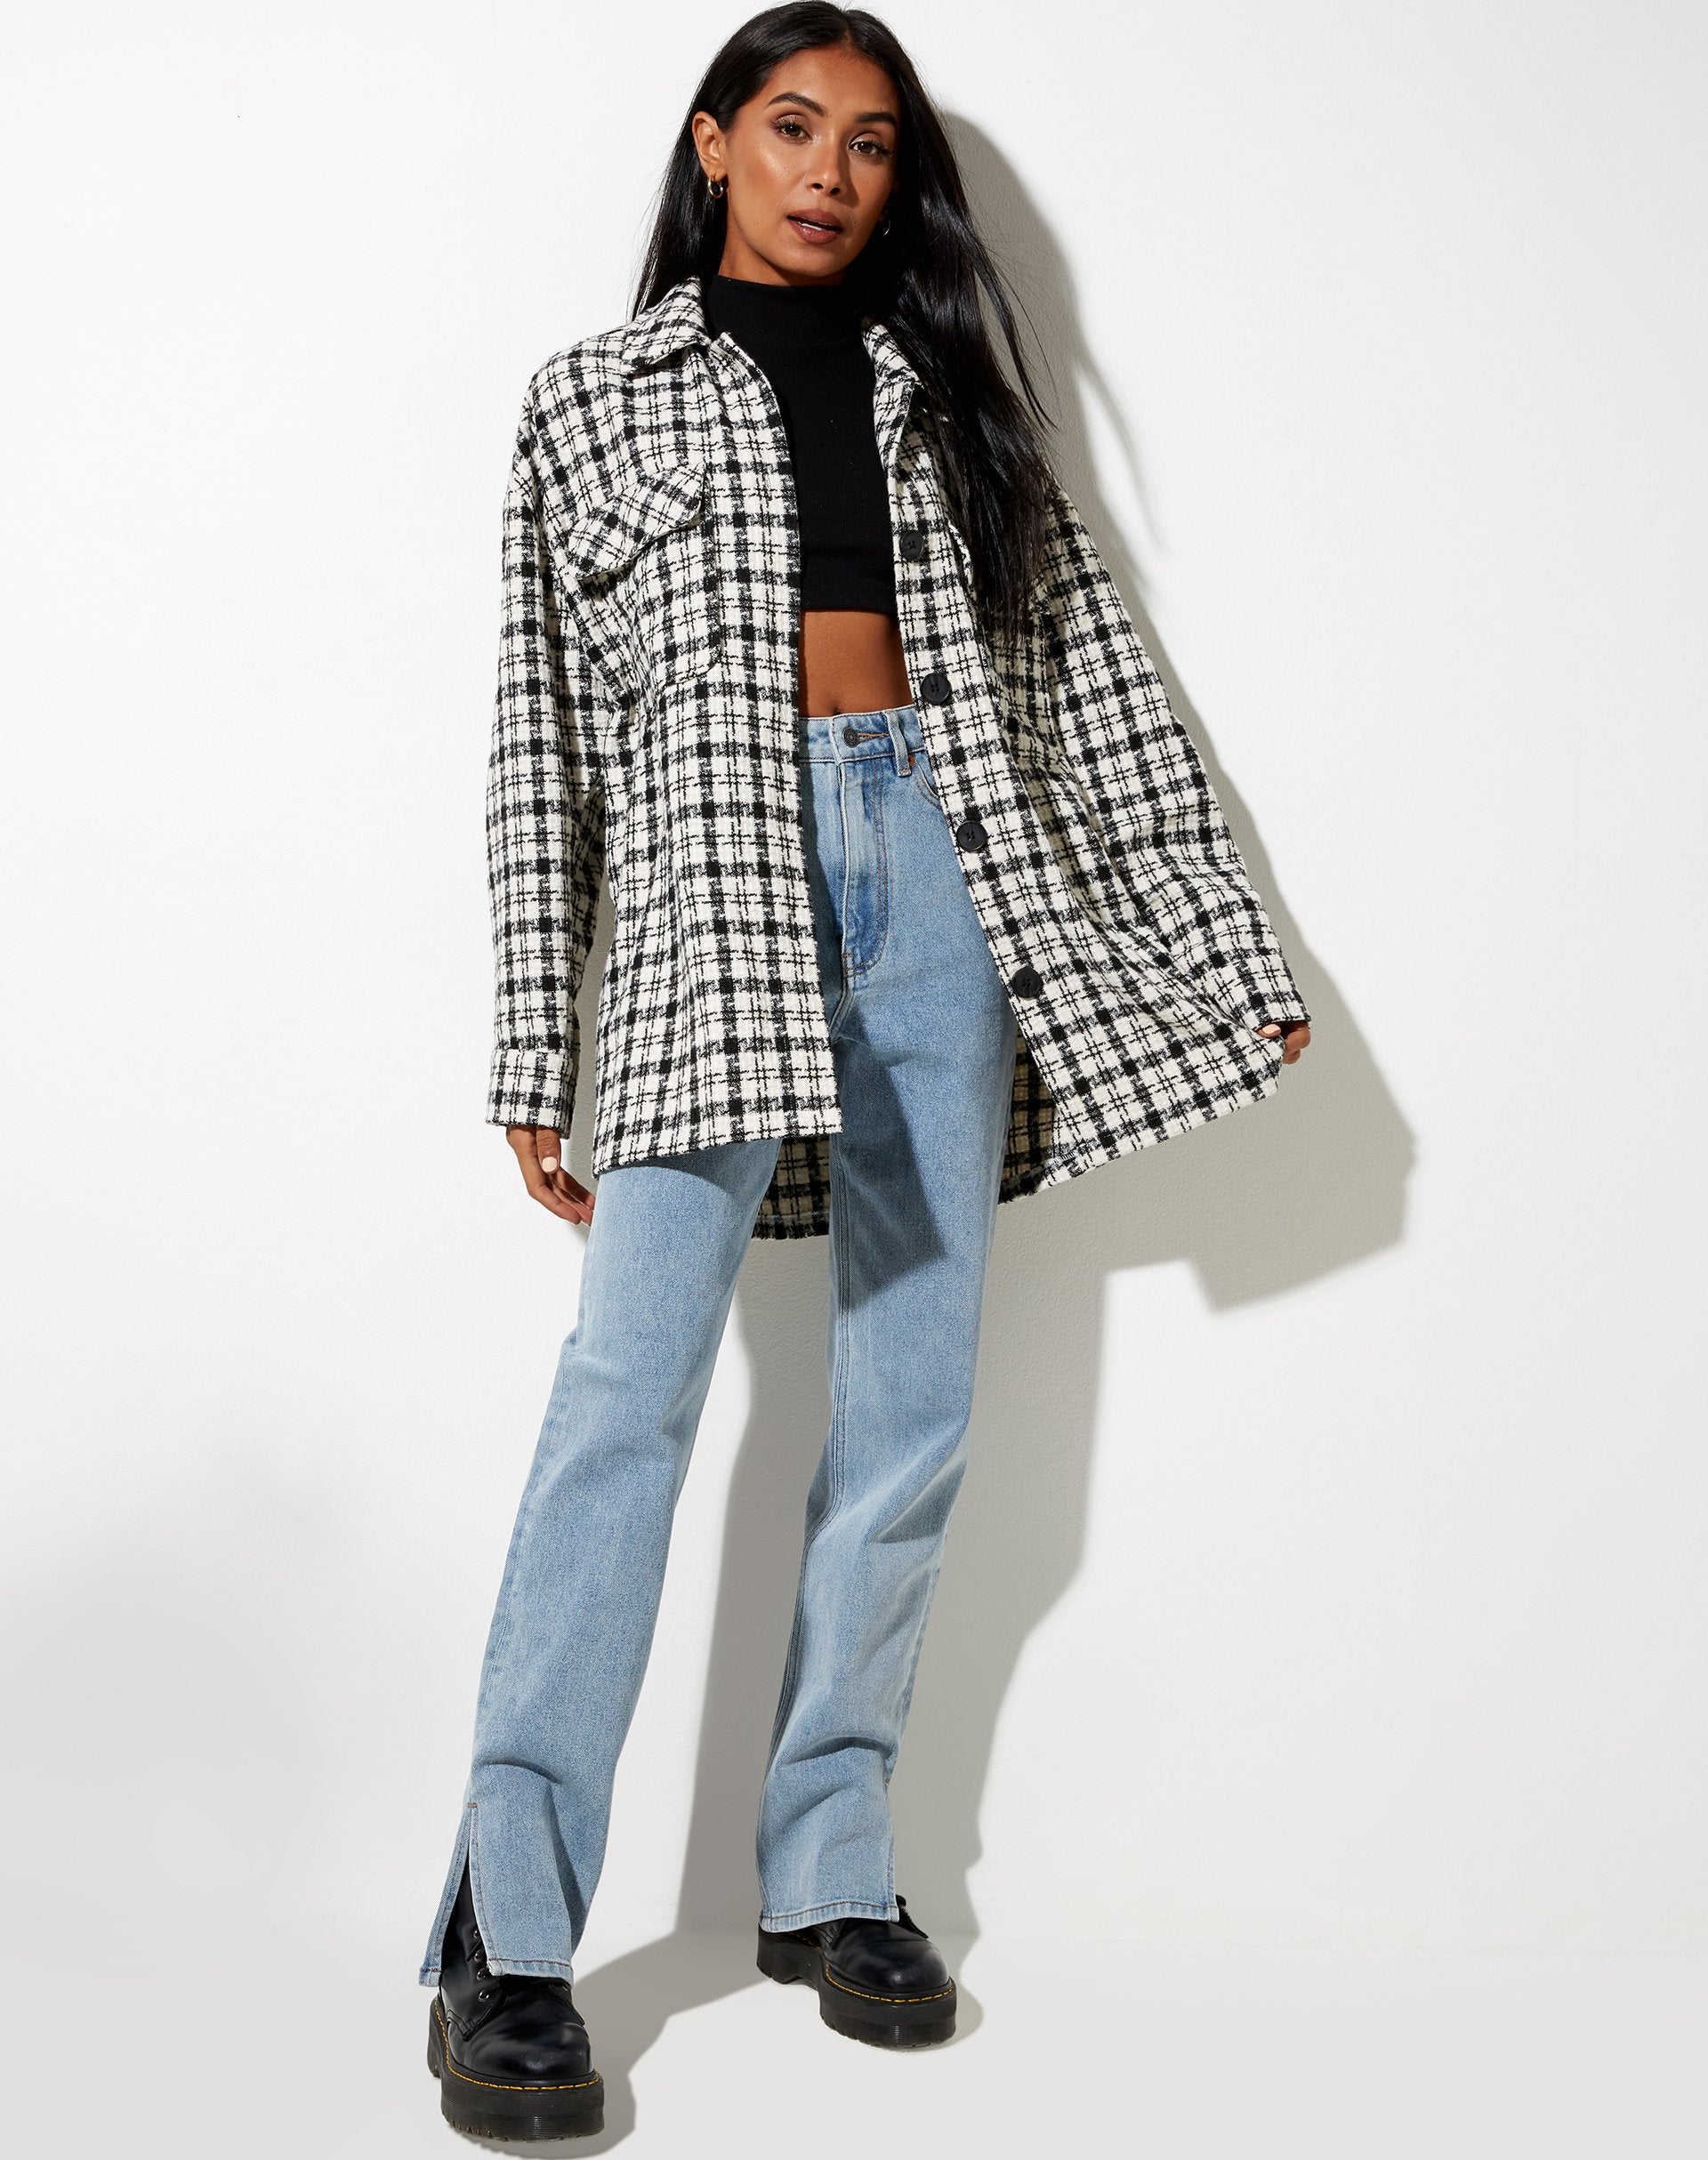 Image of Marcella Shirt in Black and White Check